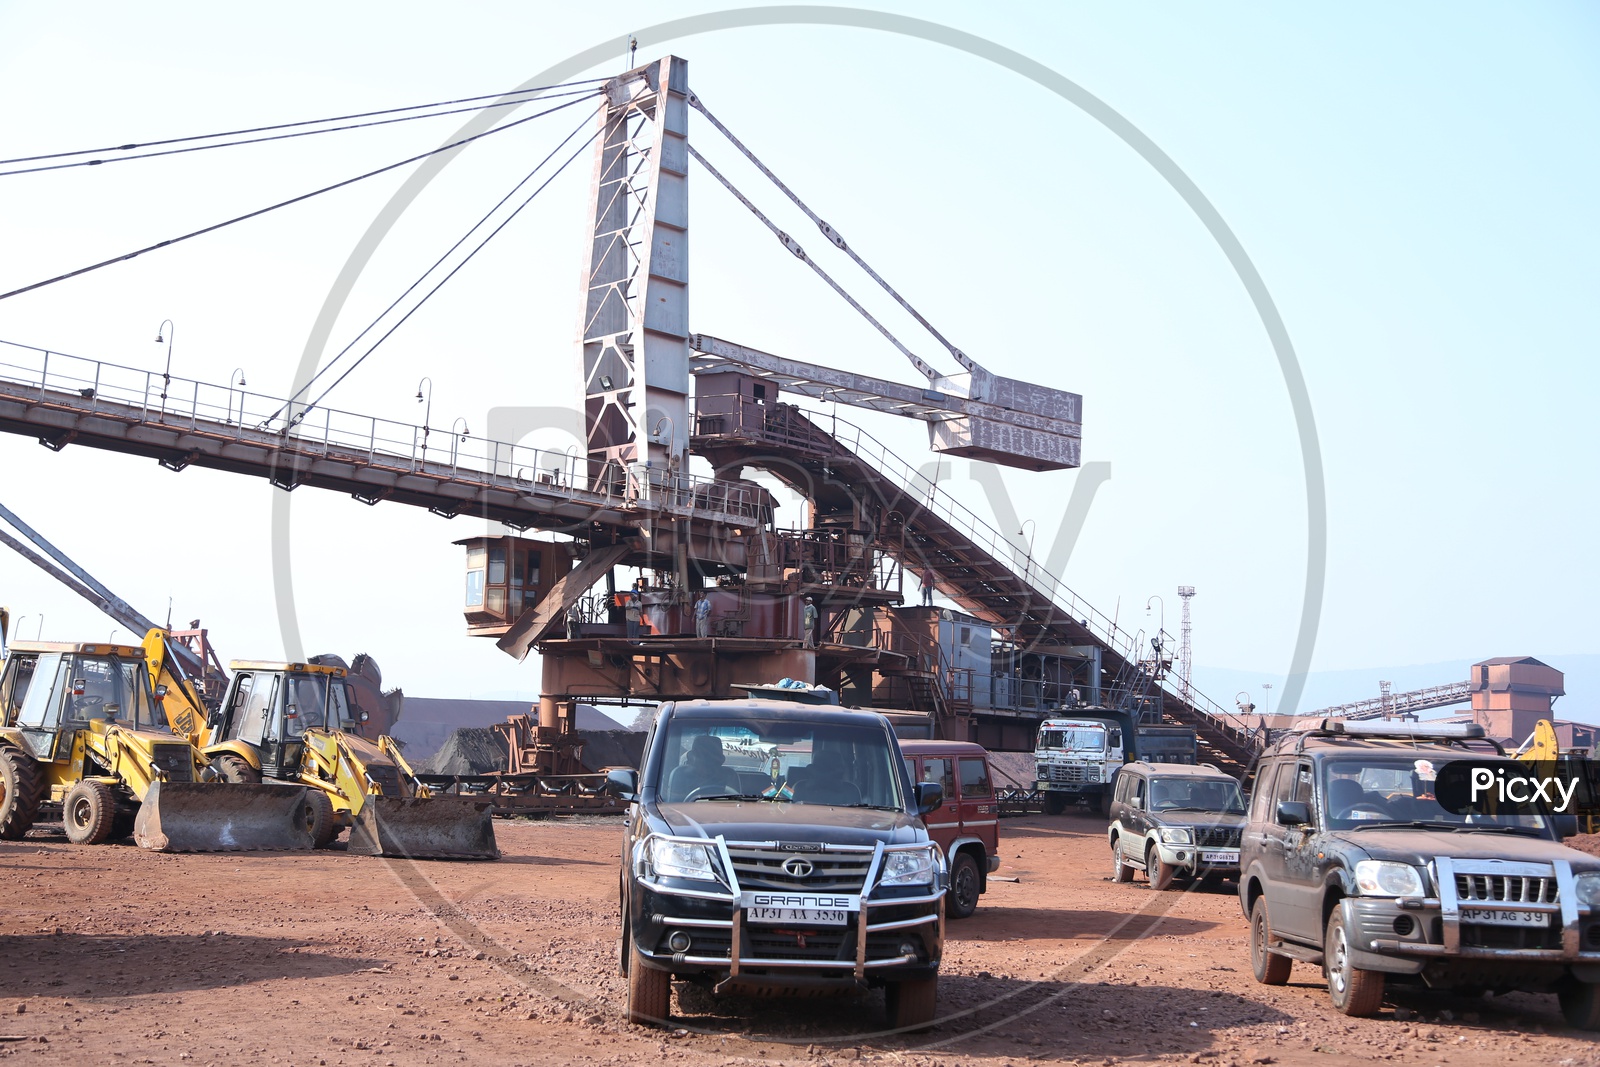 Xuv Cars In a Mining Area